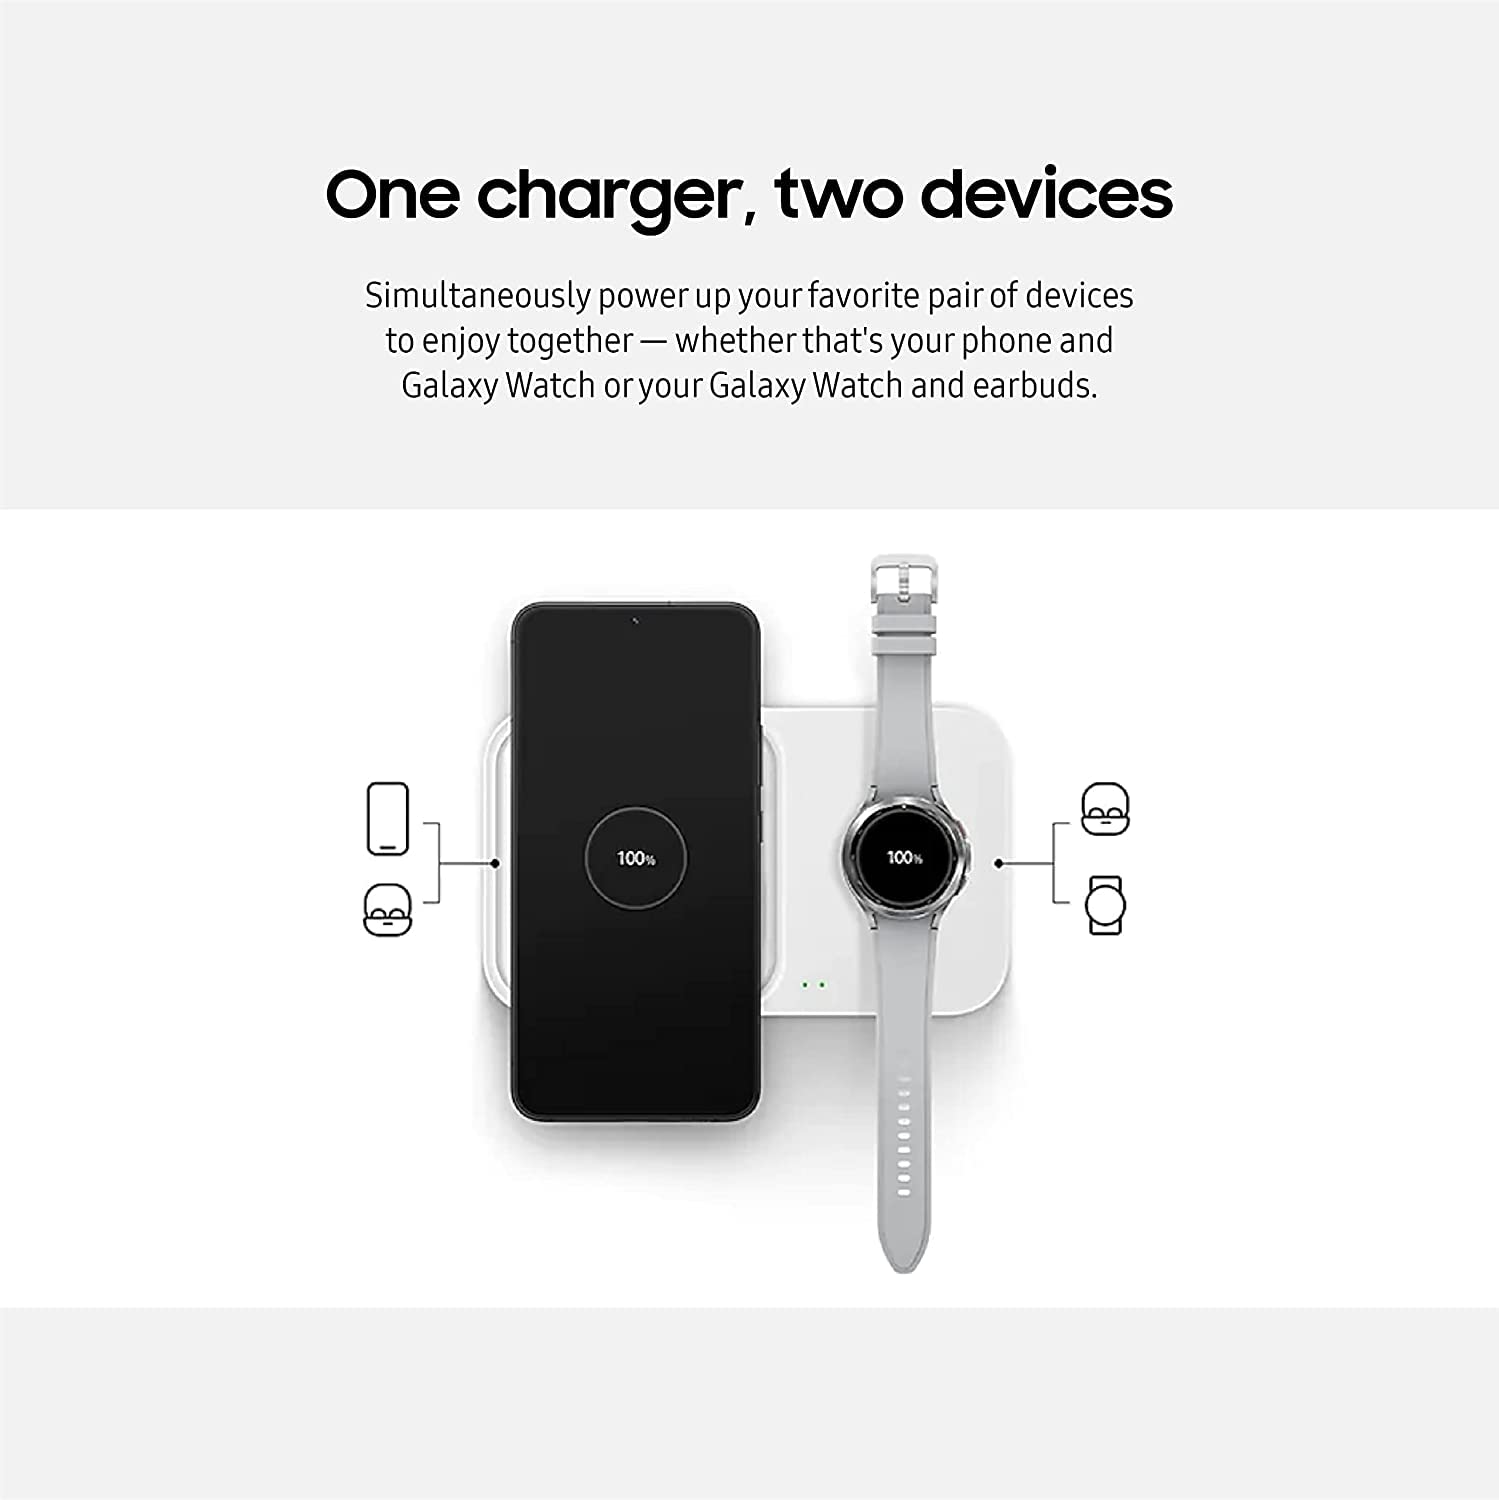 SAMSUNG 15W Wireless Charger Duo w/USB C Cable, Fast Charge 2 Devices at Once, Cordless Charging Pad for Galaxy Phones and Devices, 2022, Includes Microfiber Cleaning Cloth - Black